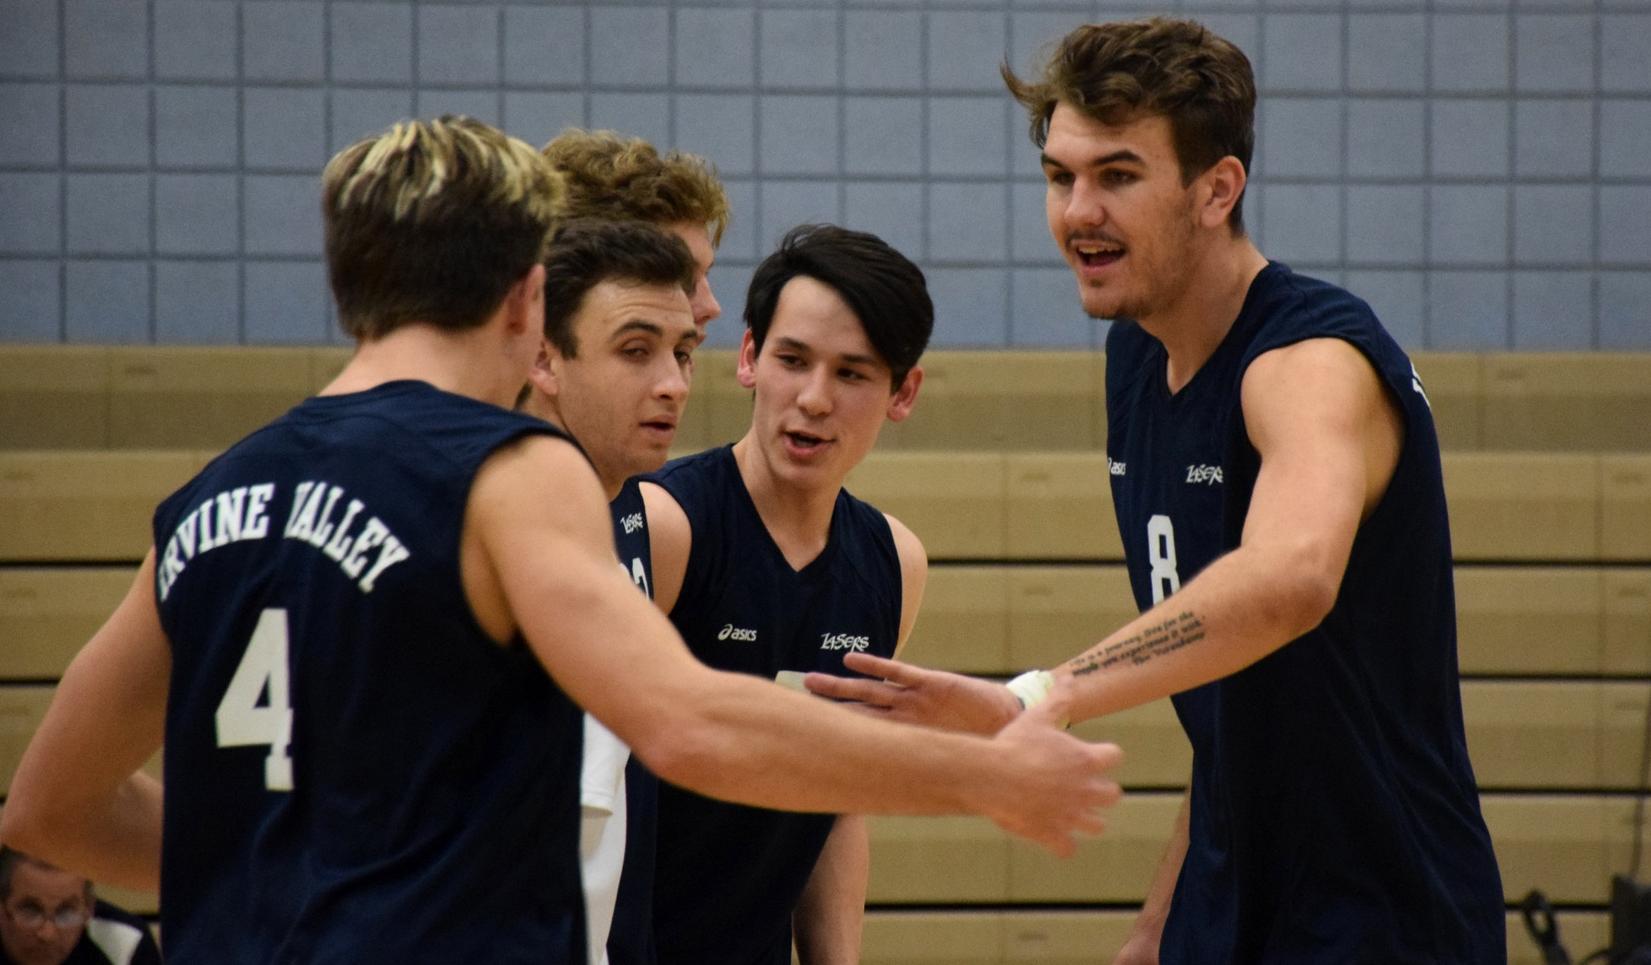 Men's volleyball team improves to 7-1 with another sweep